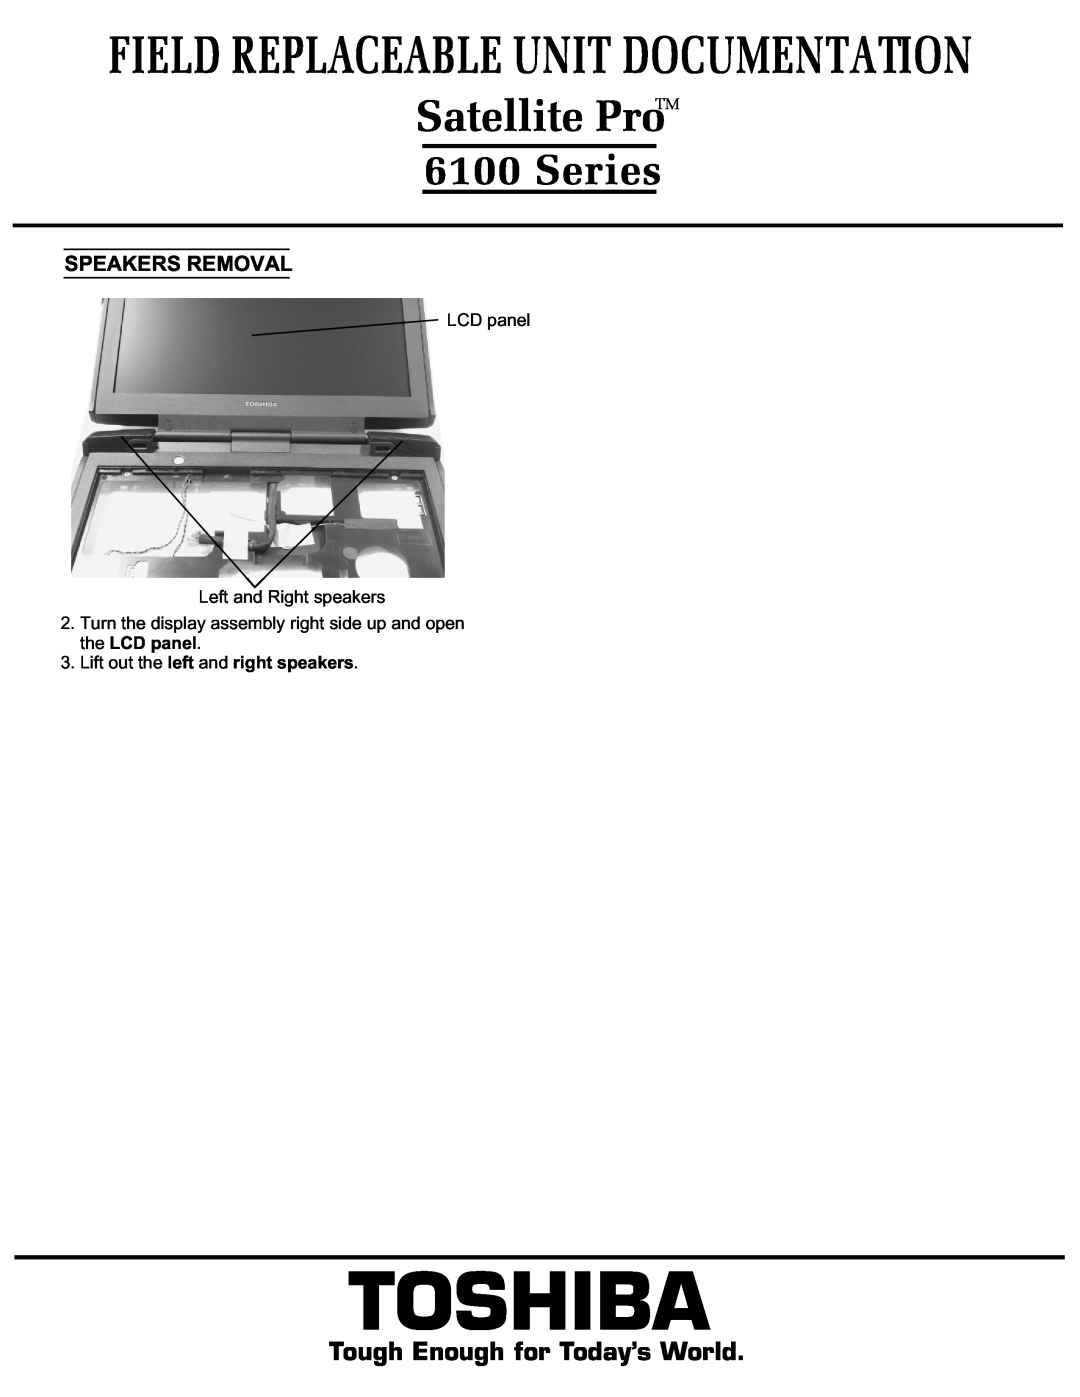 Toshiba 6100 manual Toshiba, Satellite Pro, Field Replaceable Unit Documentation, Series, Tough Enough for Today’s World 